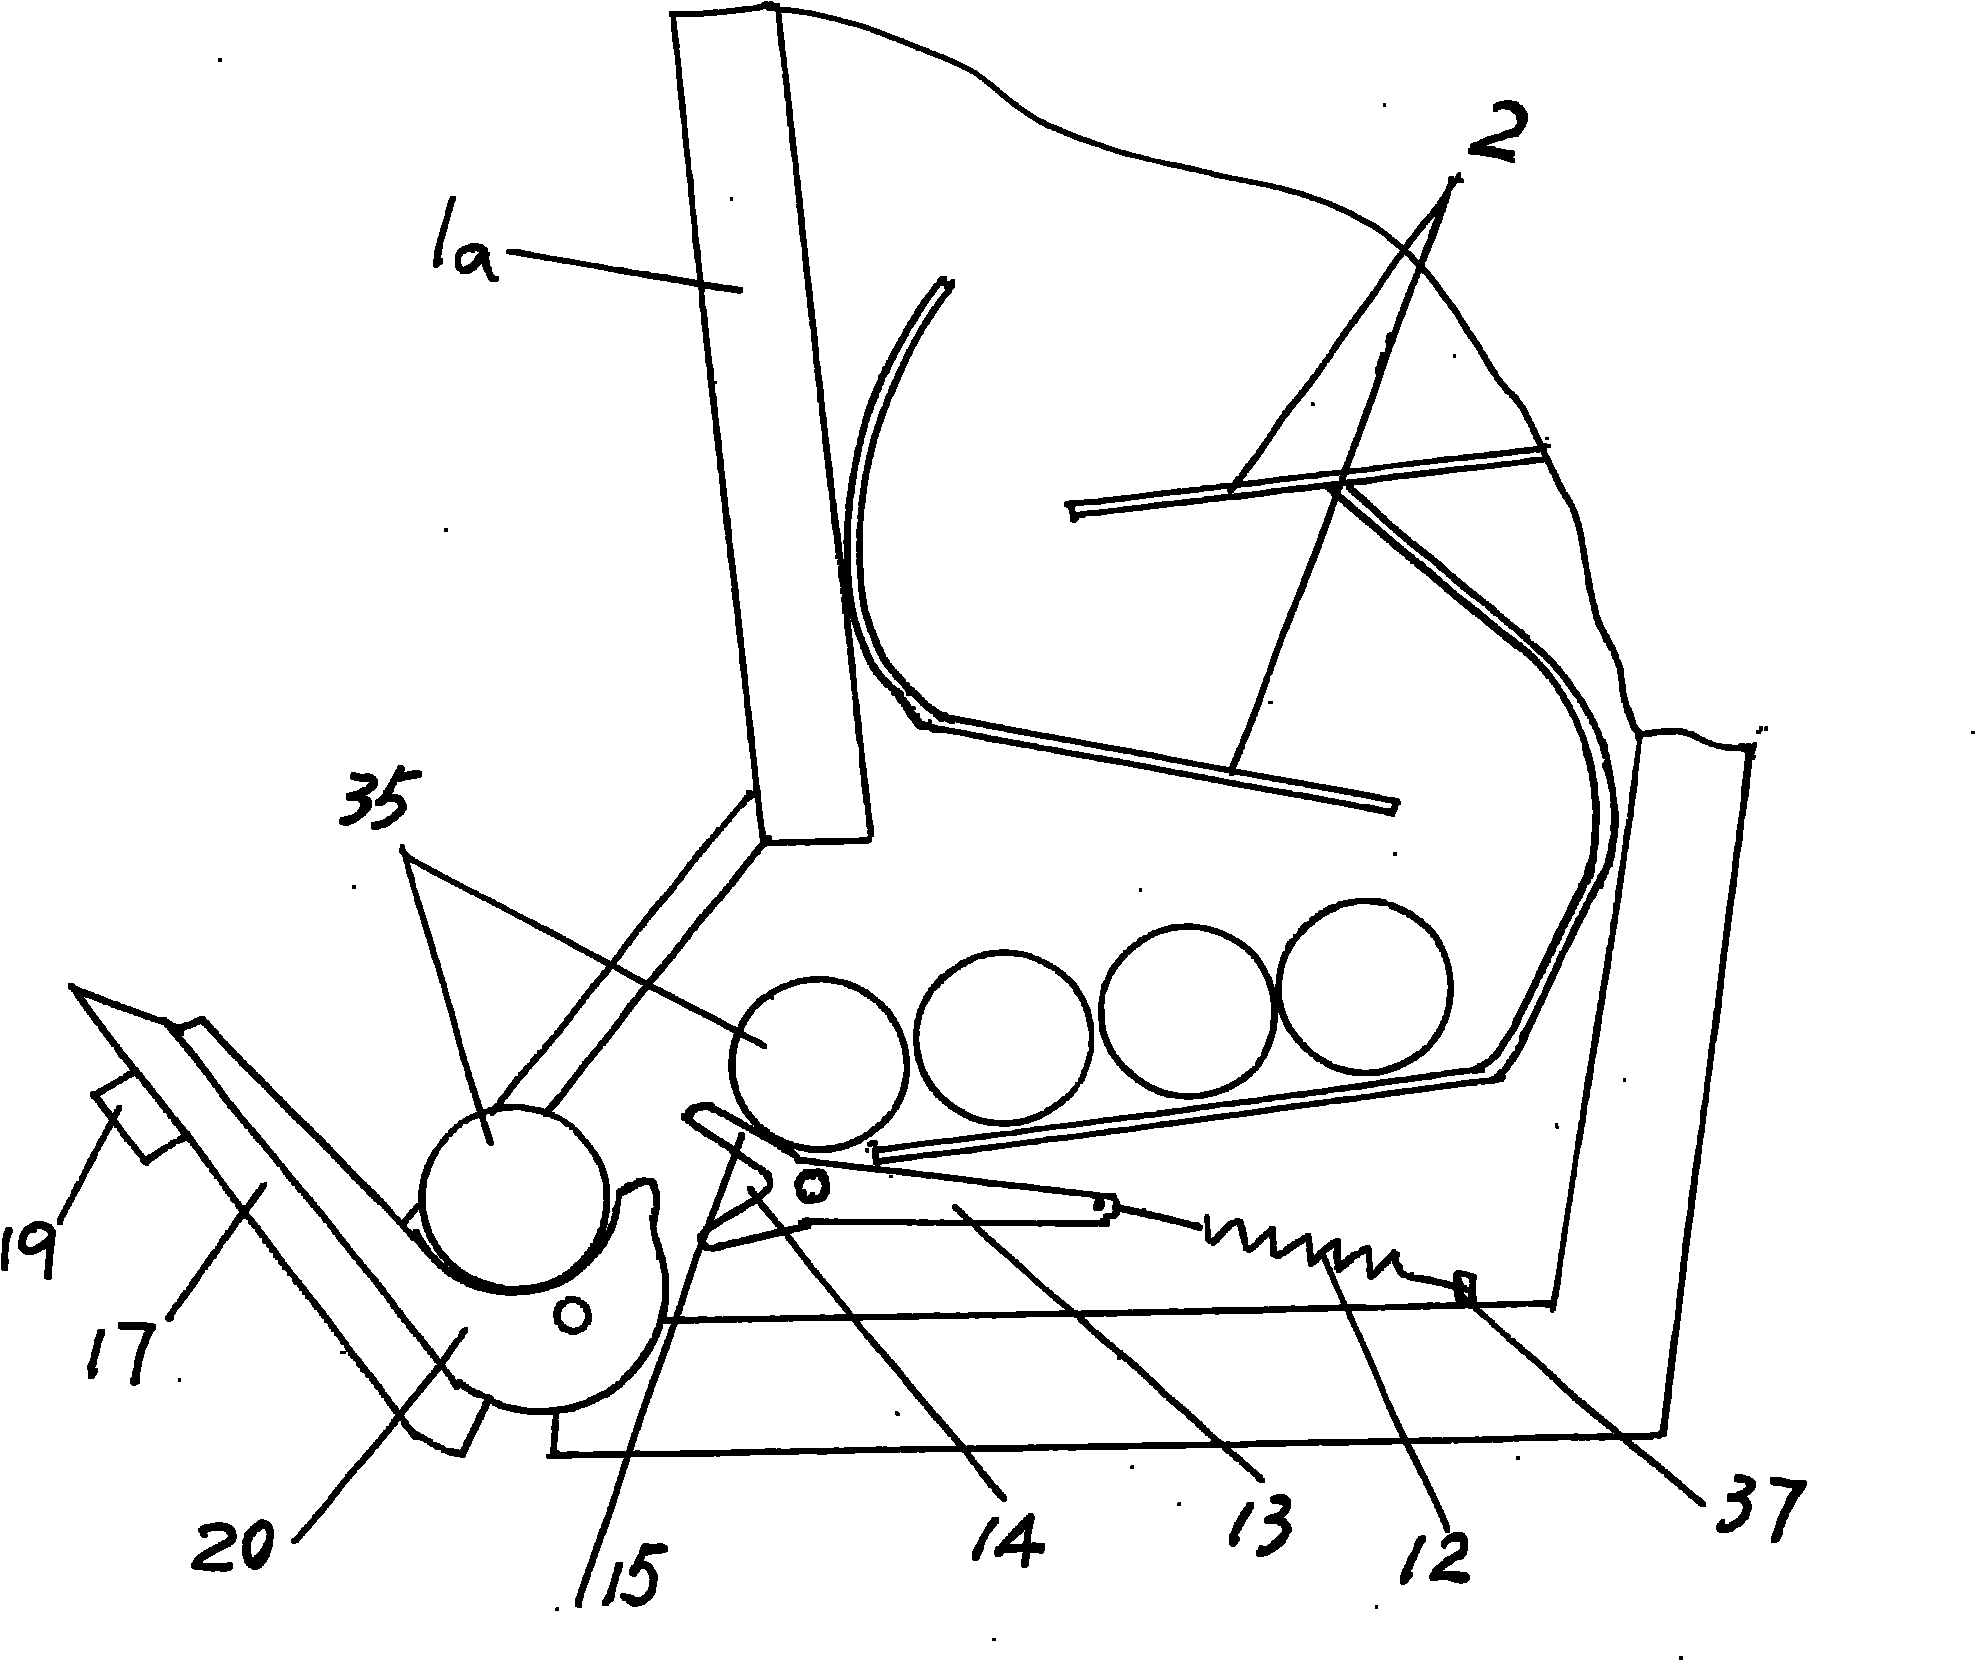 Automatic can taking device